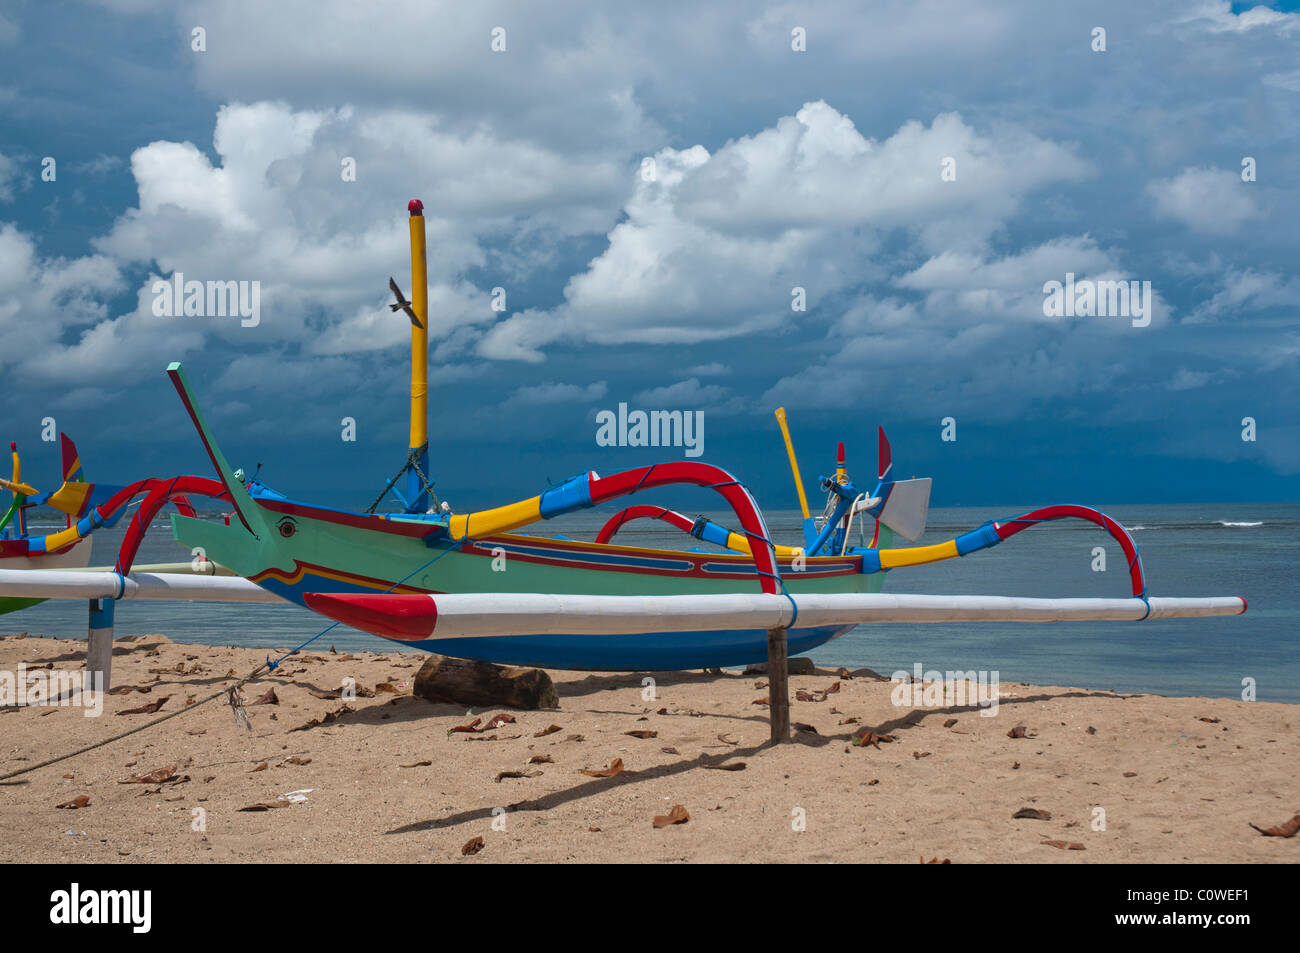 Colorful Balinese fishing boat called jukung in sunlight against a monsoon sky on Sanur Beach, Bali Indonesia  Stock Photo